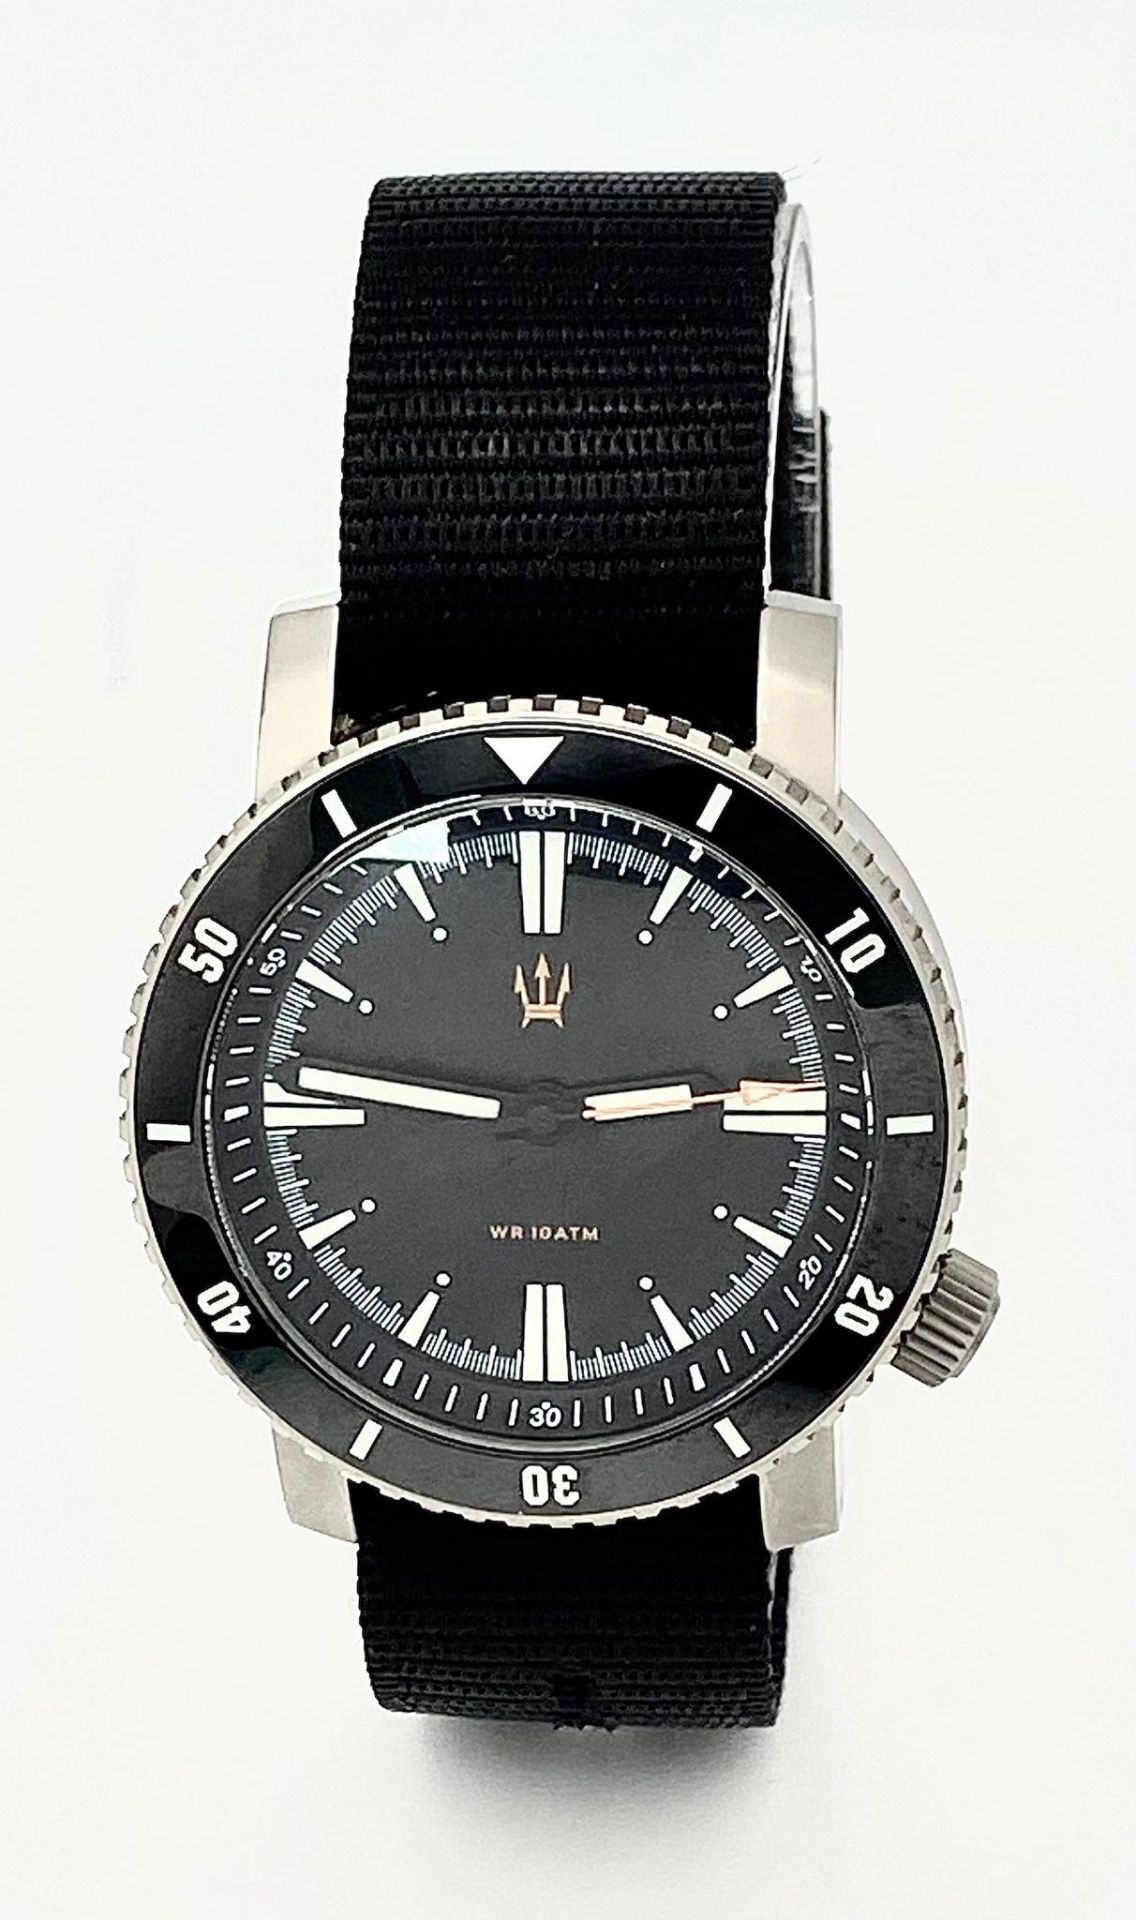 An Excellent Condition, Limited Edition, Military Specification, Automatic Divers Watch by - Bild 2 aus 7